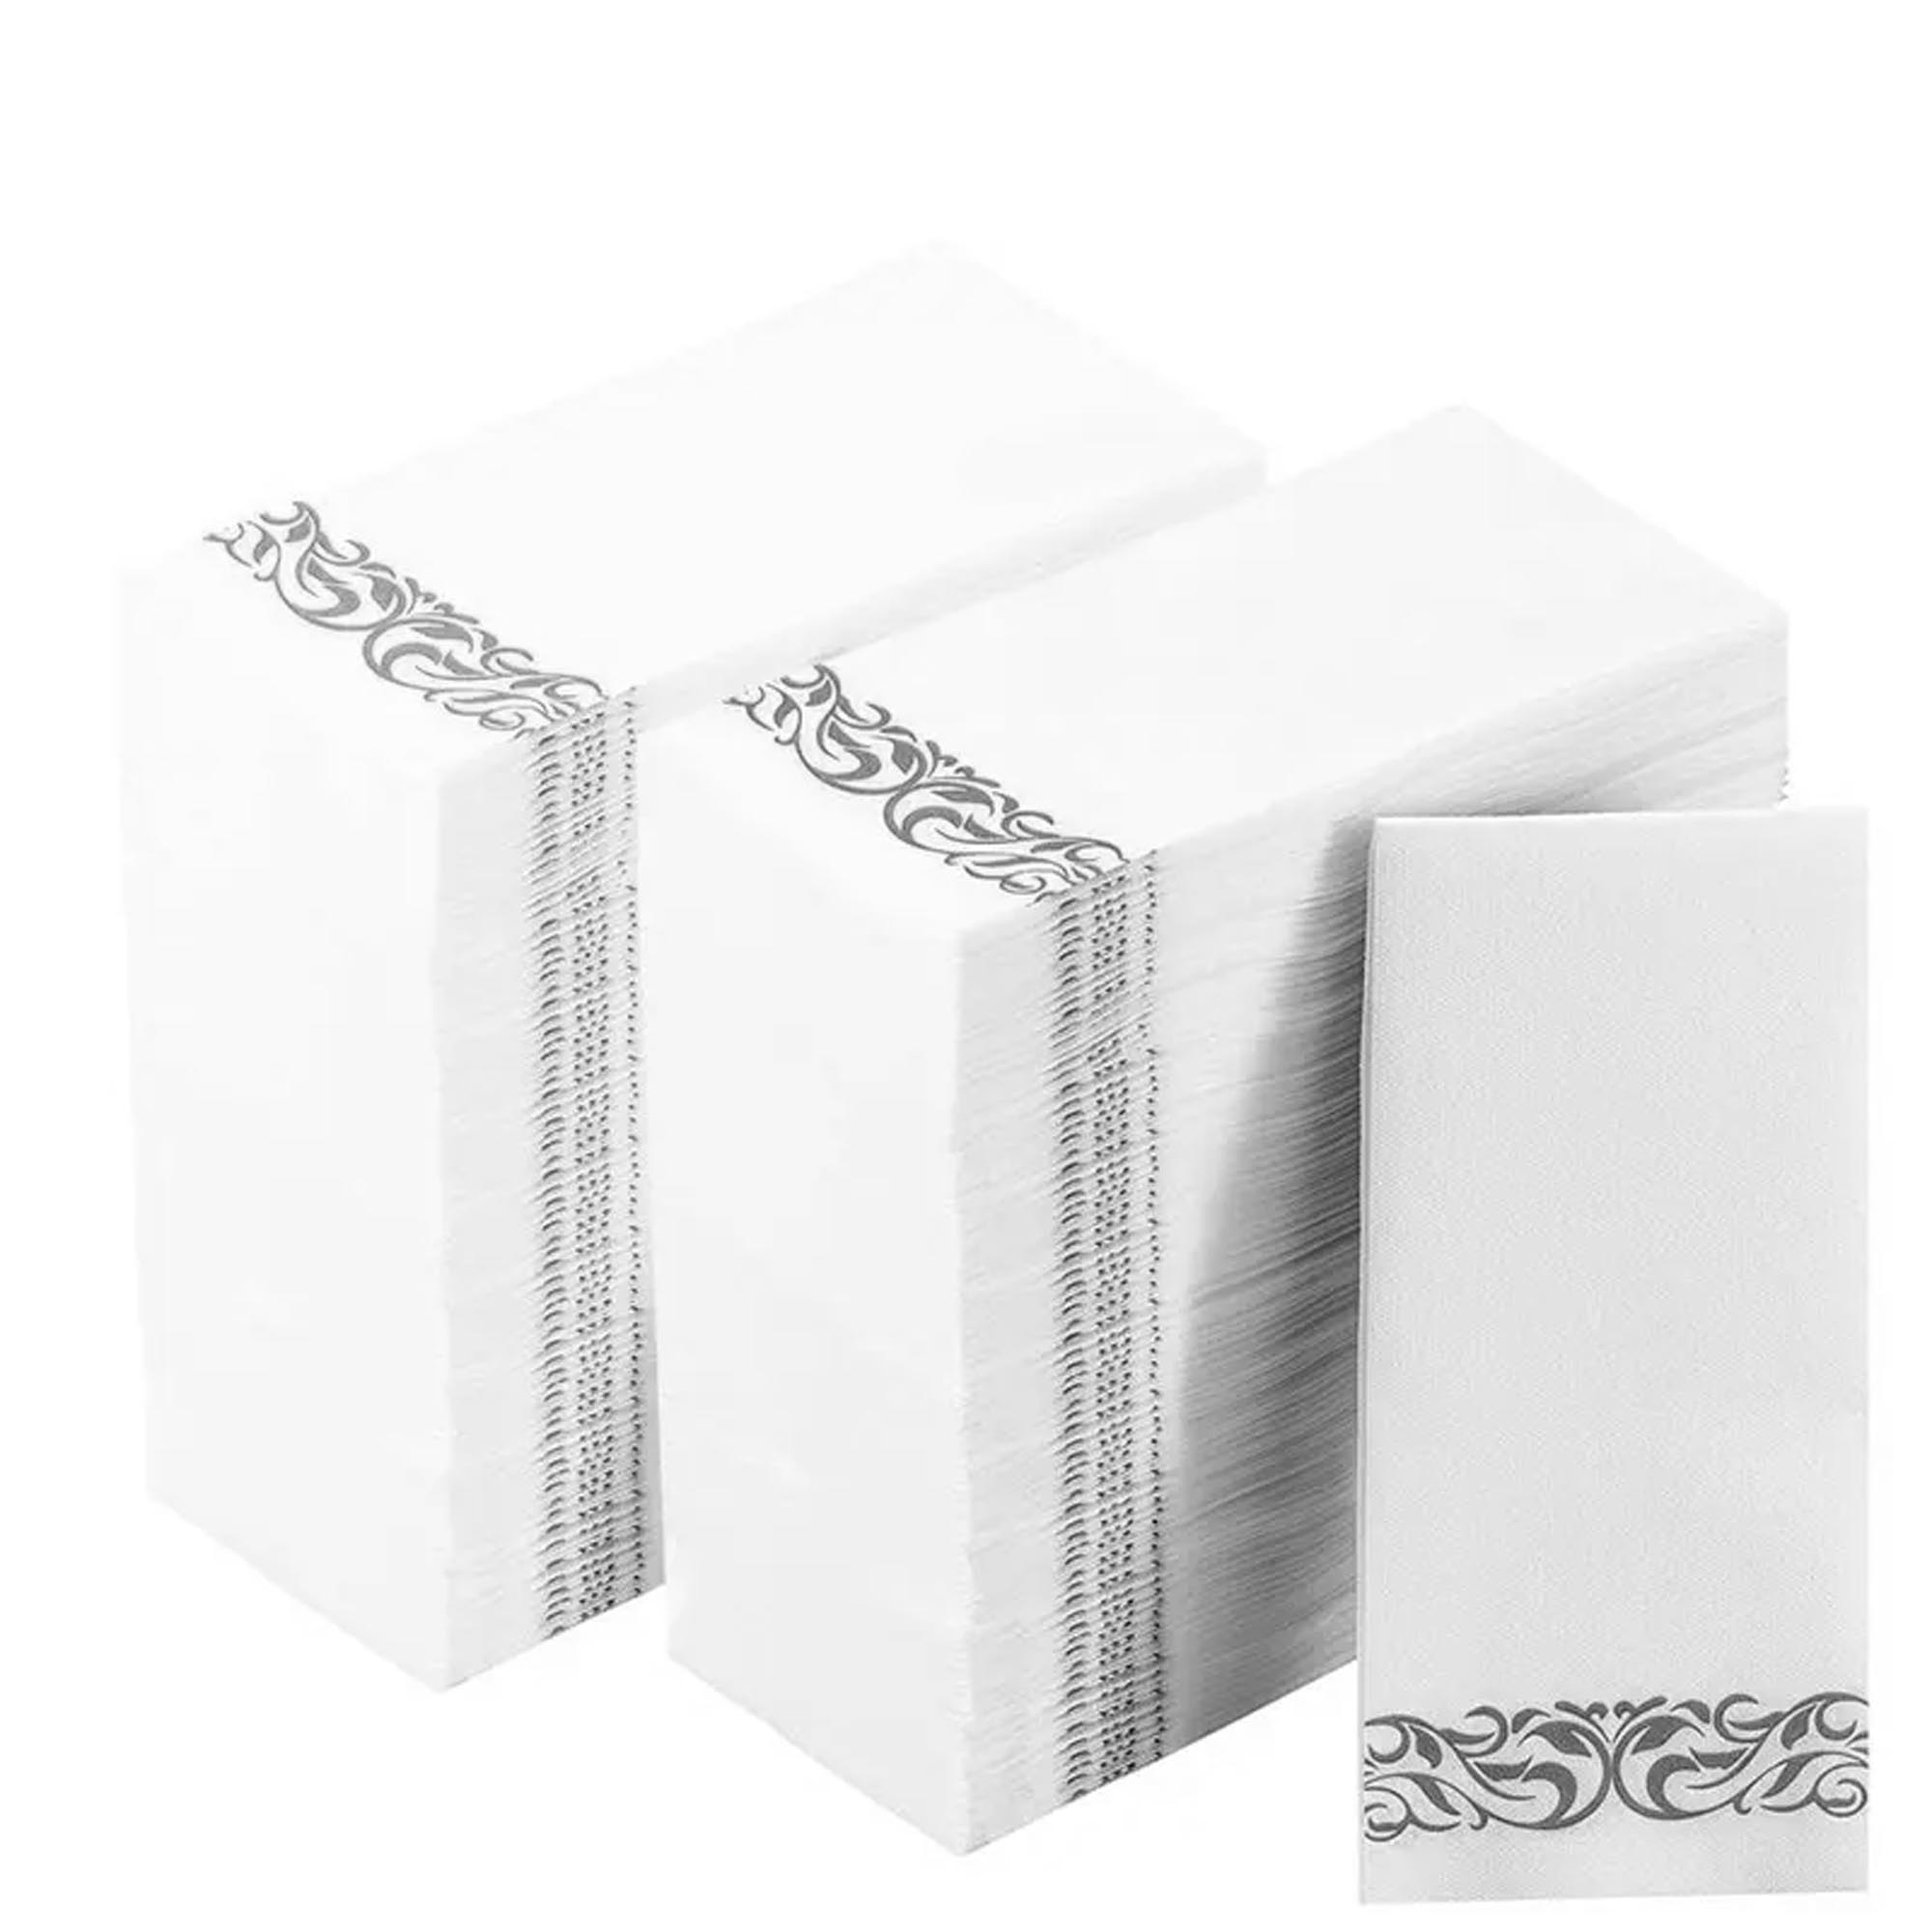 Paper Party Napkins Household Supplies Disposable linen-like napkins fancy disposable napkins heavy duty napkins classic elegant sturdy napkins reusable table setting catering high quality birthday anniversary party decor